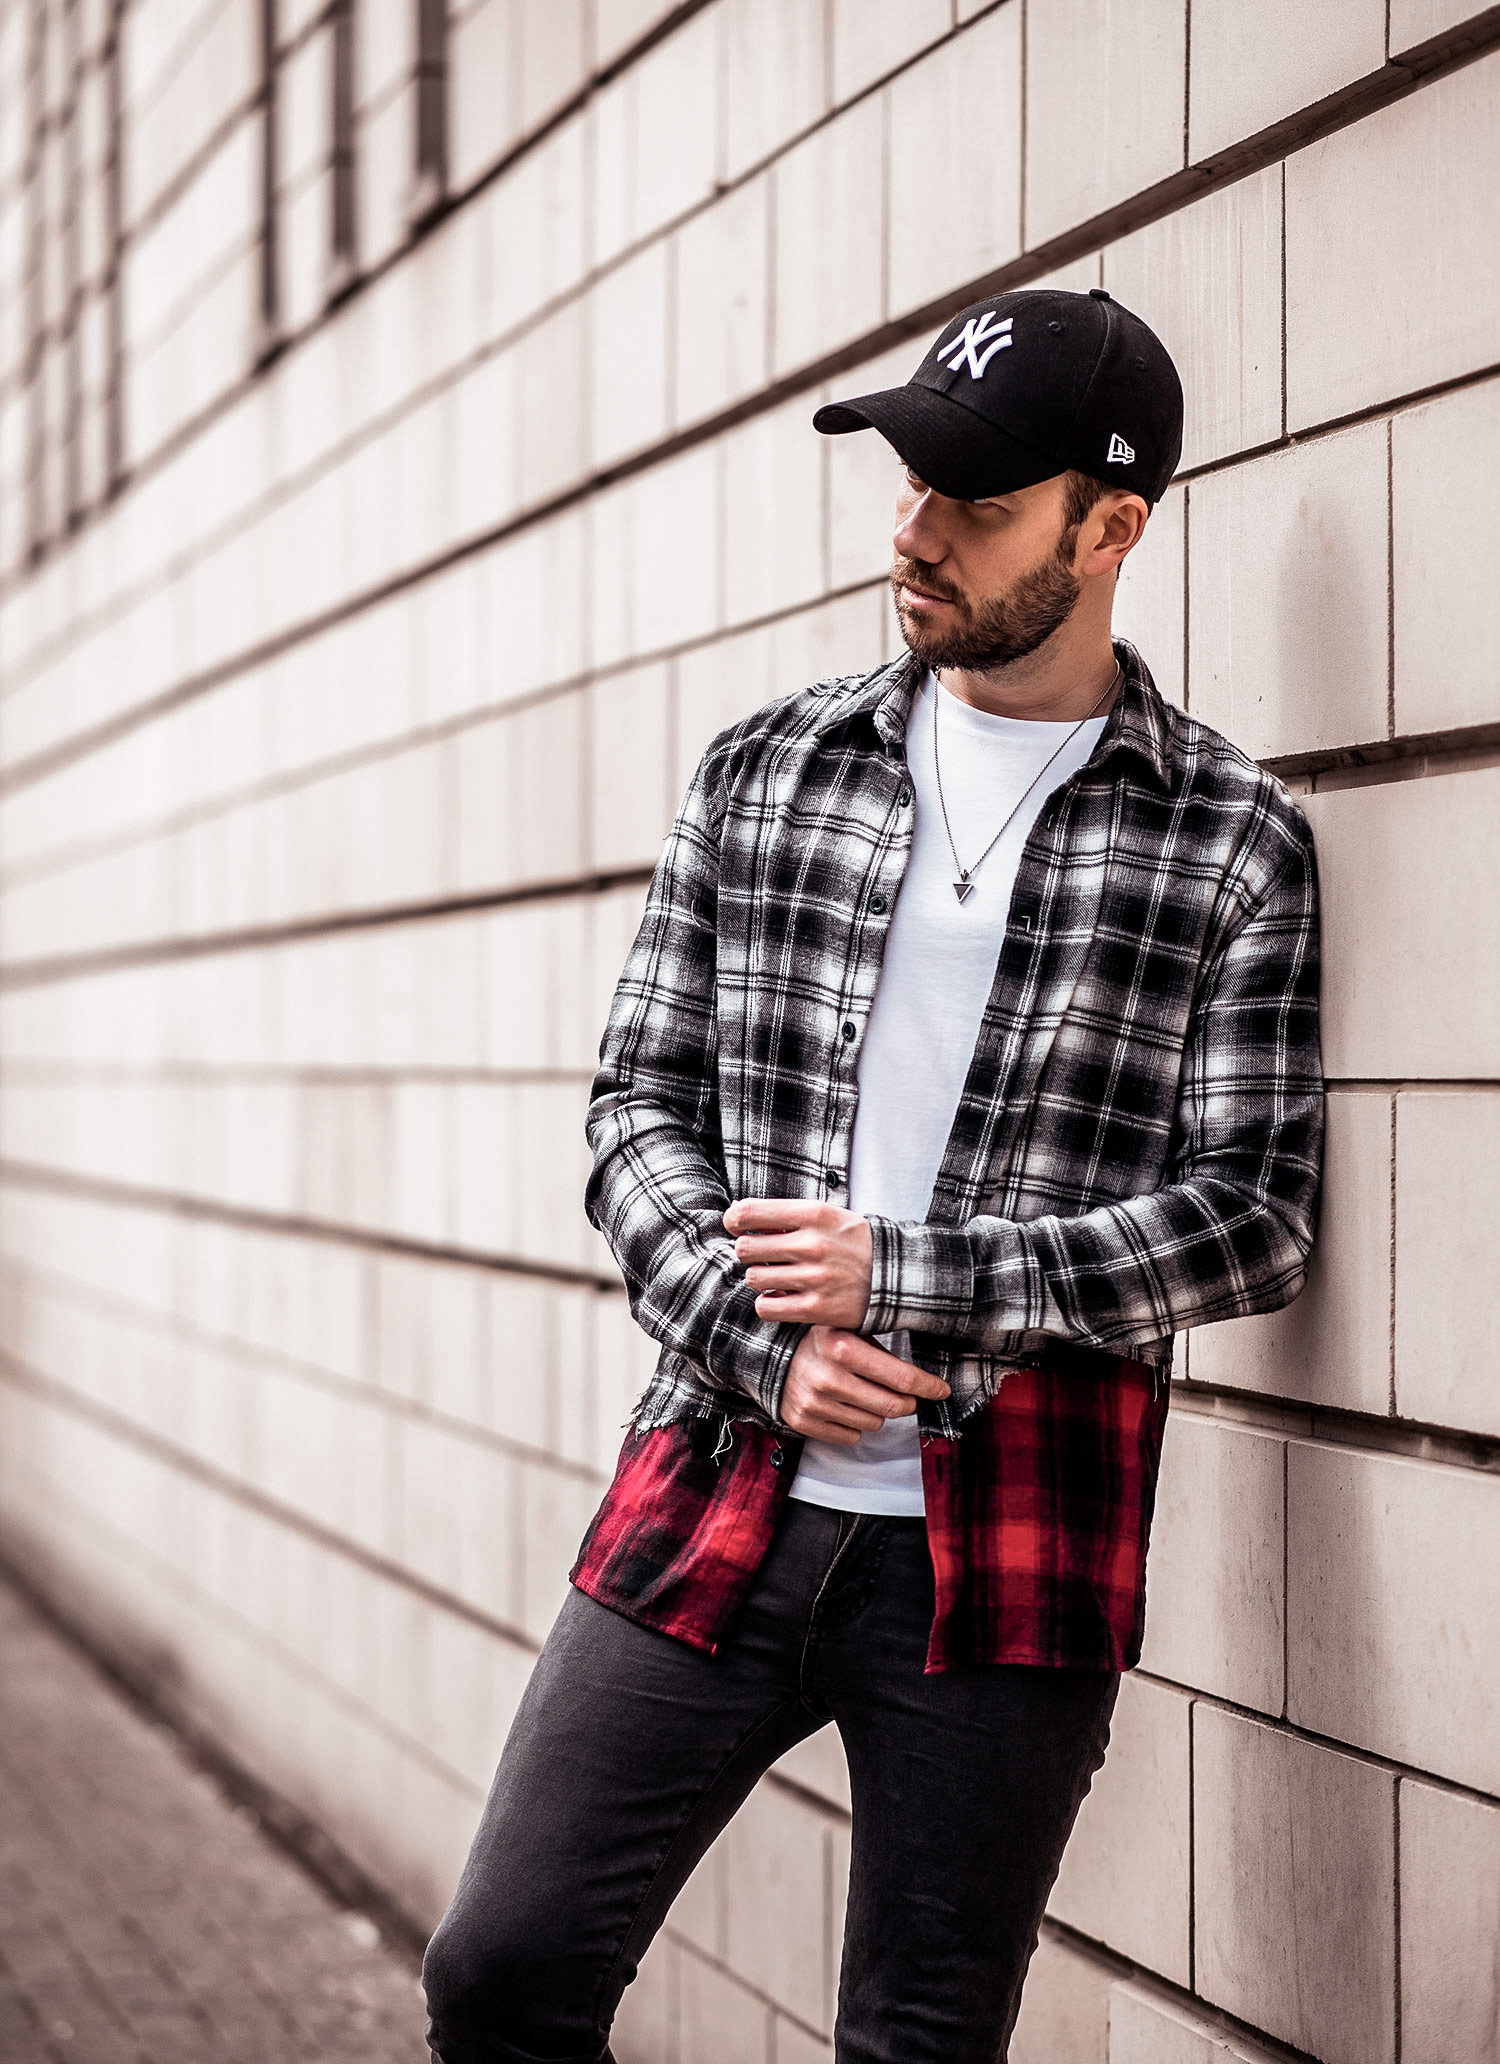 Black & Red Check Shirt Outfit | Your Average Guy